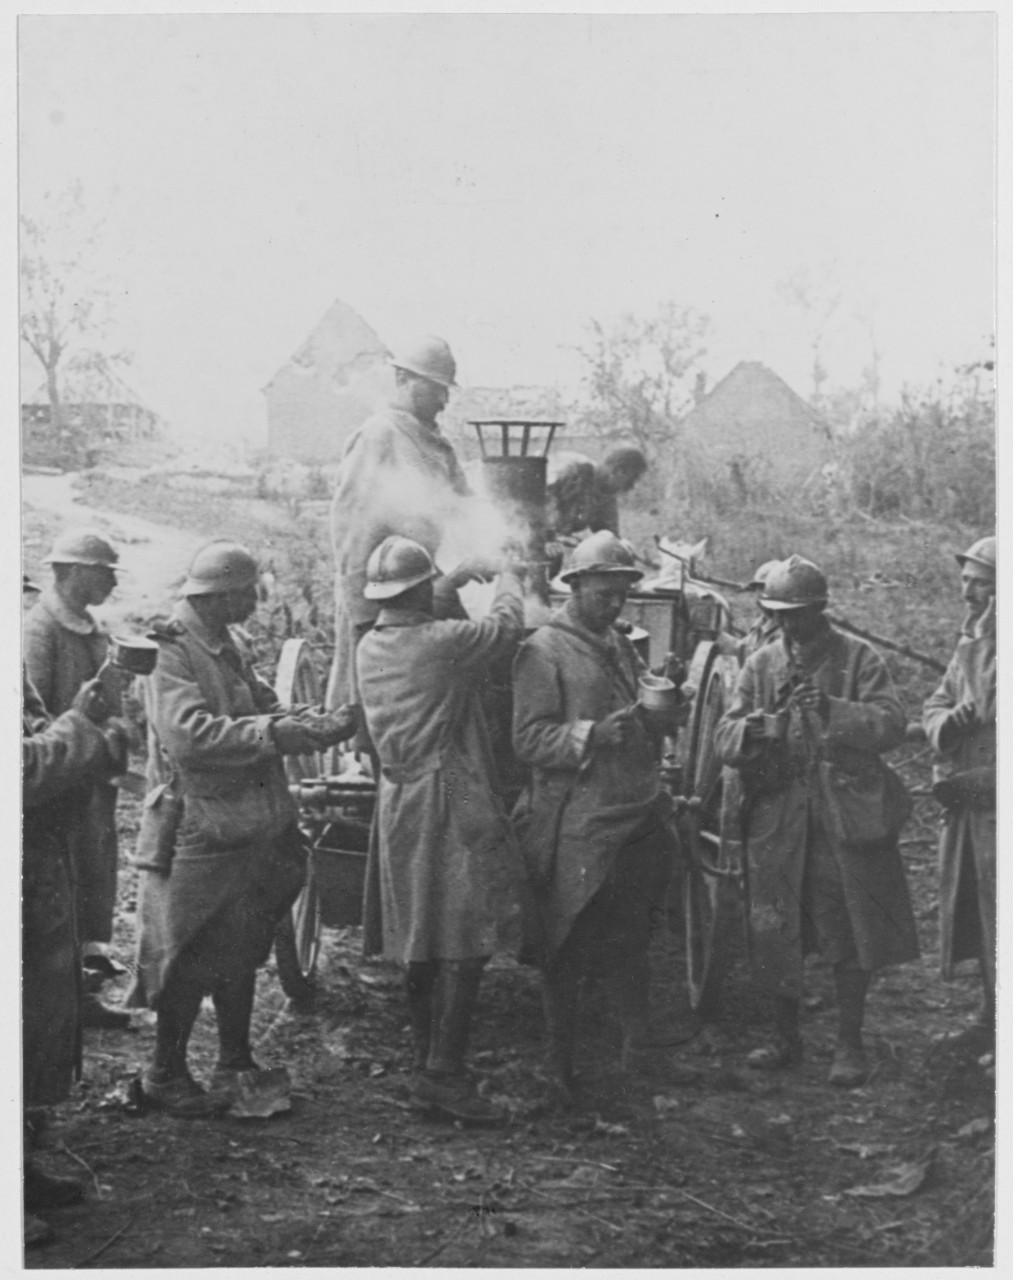 Men serving refreshments from a movable kitchen in ruined Curlu, France on the Somme, during World War I